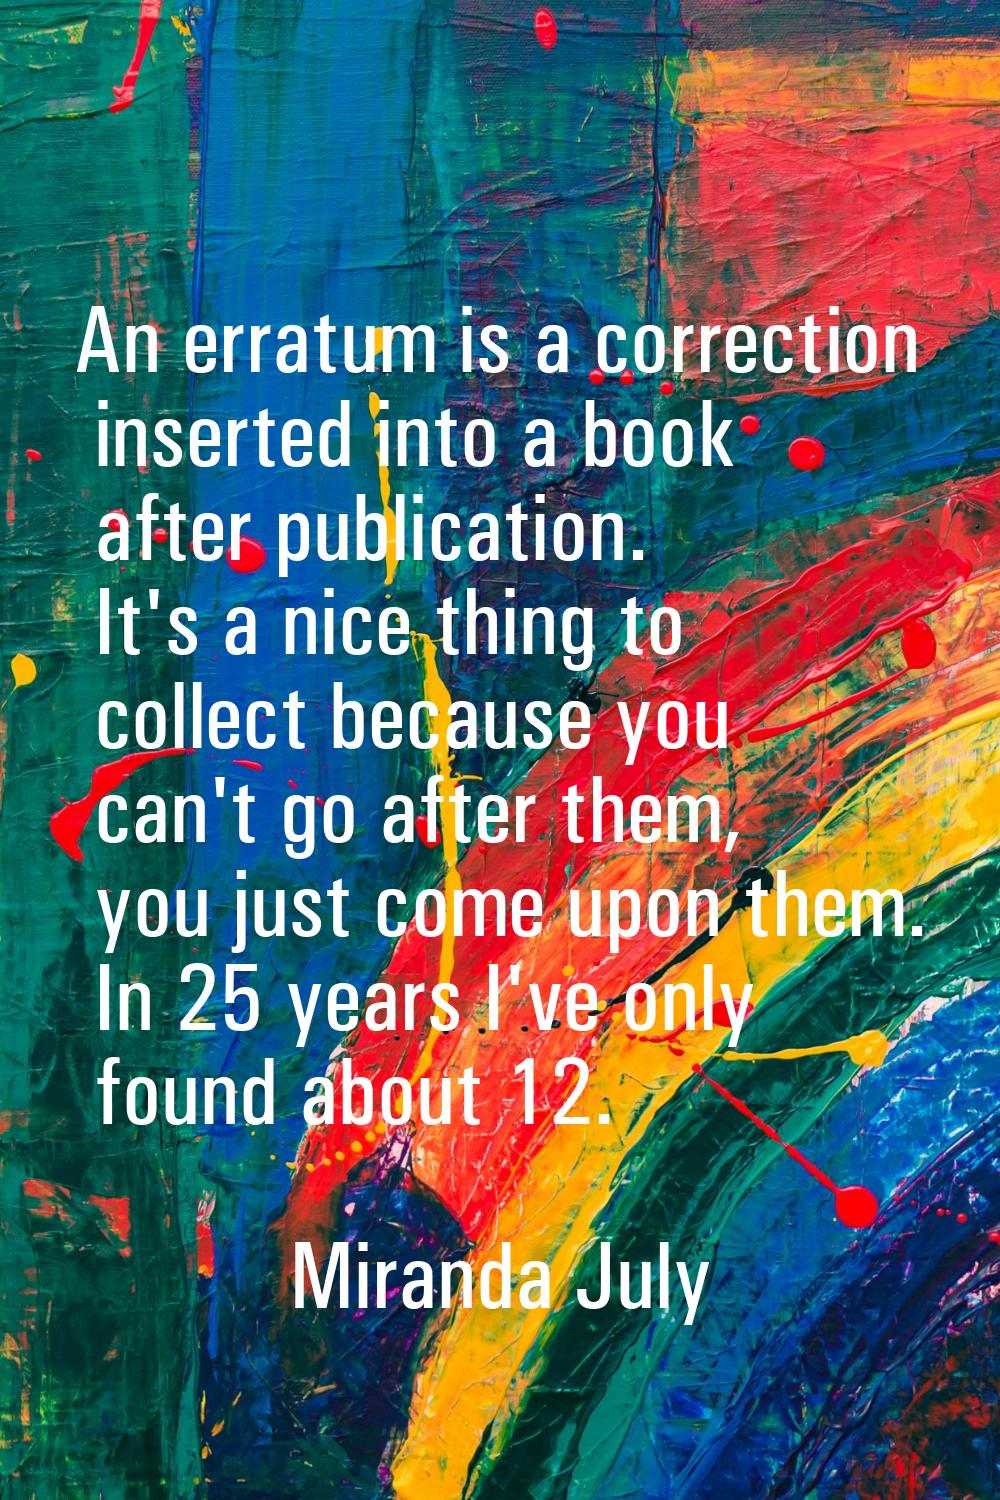 An erratum is a correction inserted into a book after publication. It's a nice thing to collect bec